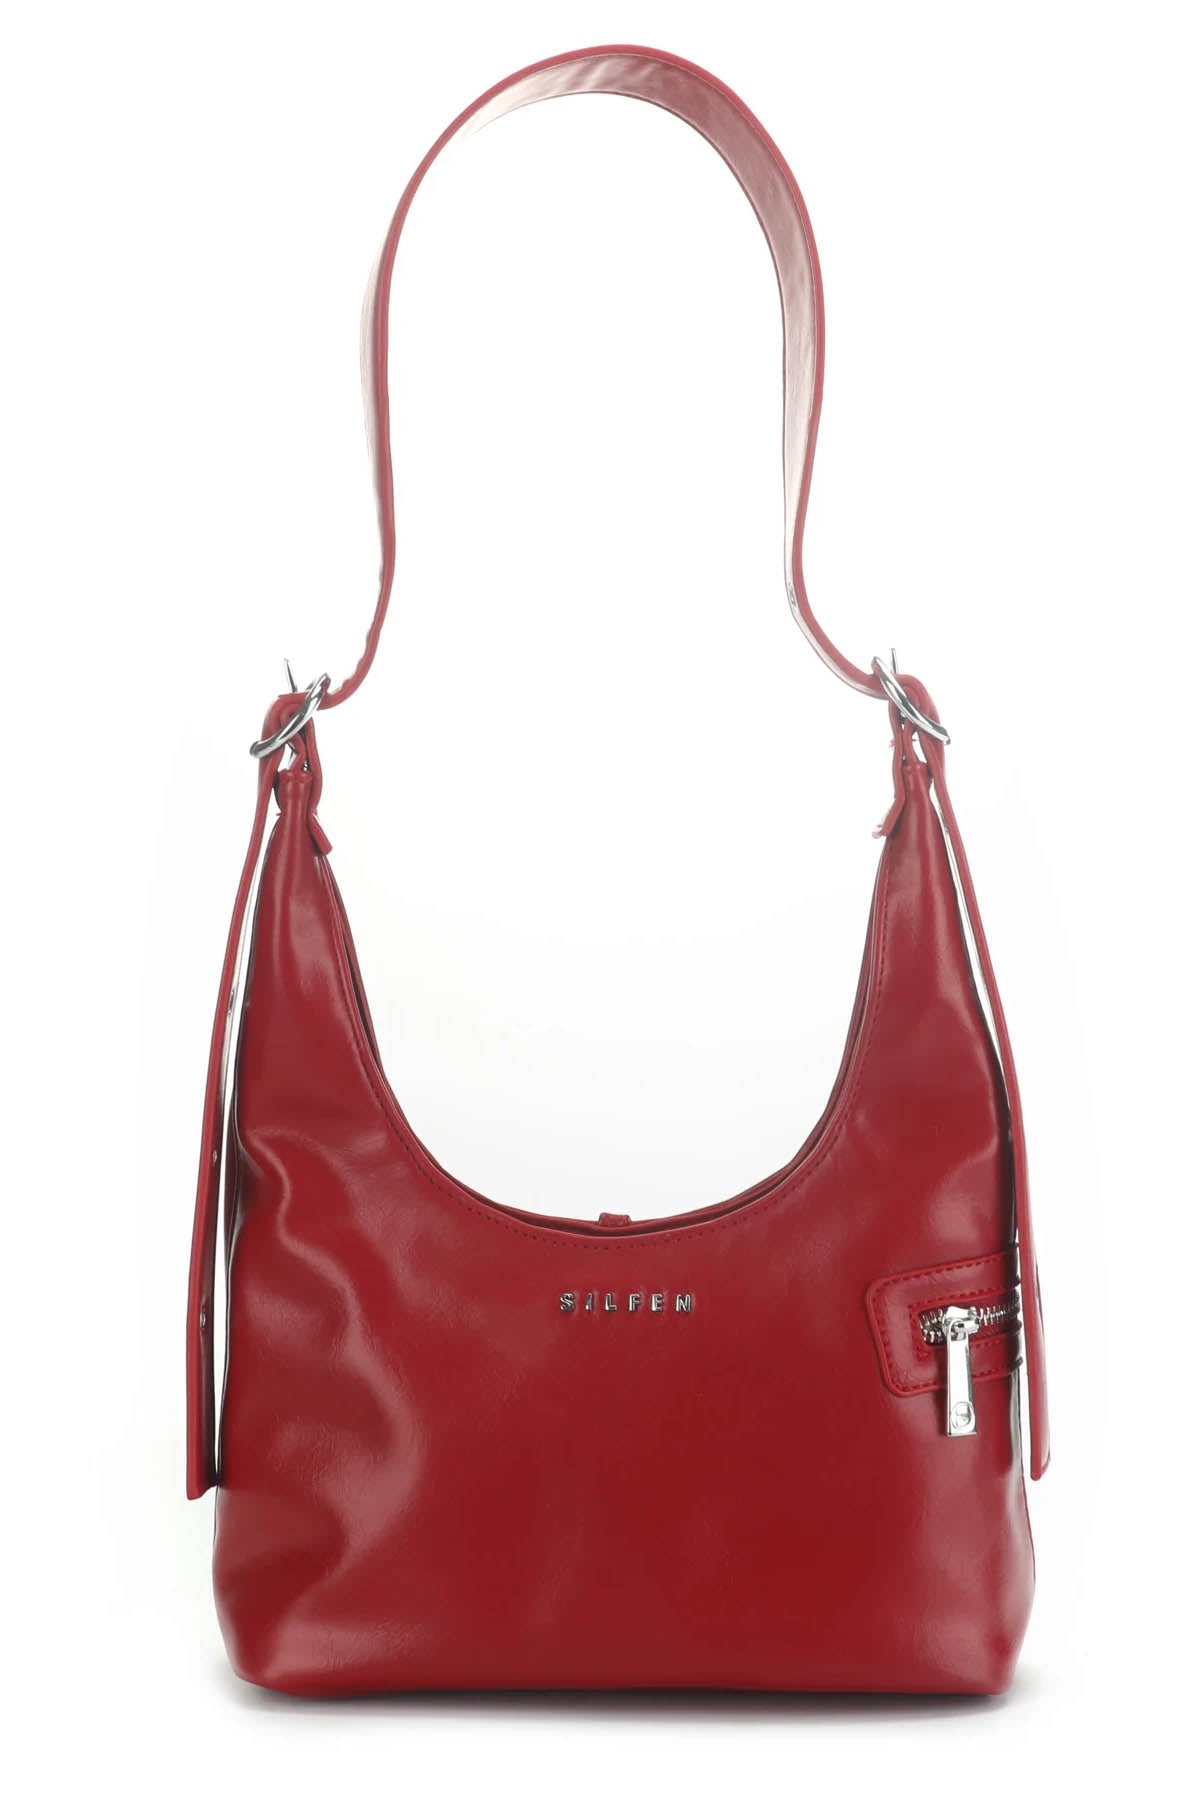 PRE | FALL EXCLUSIVE - THE LOTTA SHOULDER BAG IN VEGAN LEATHER / WINE RED HUE - EXCLUSIVE Bags from SILFEN - Just €79.99! SHOP NOW AT IAMINHATELOVE BOTH IN STORE FOR CYPRUS AND ONLINE WORLDWIDE @ IAMINHATELOVE.COM